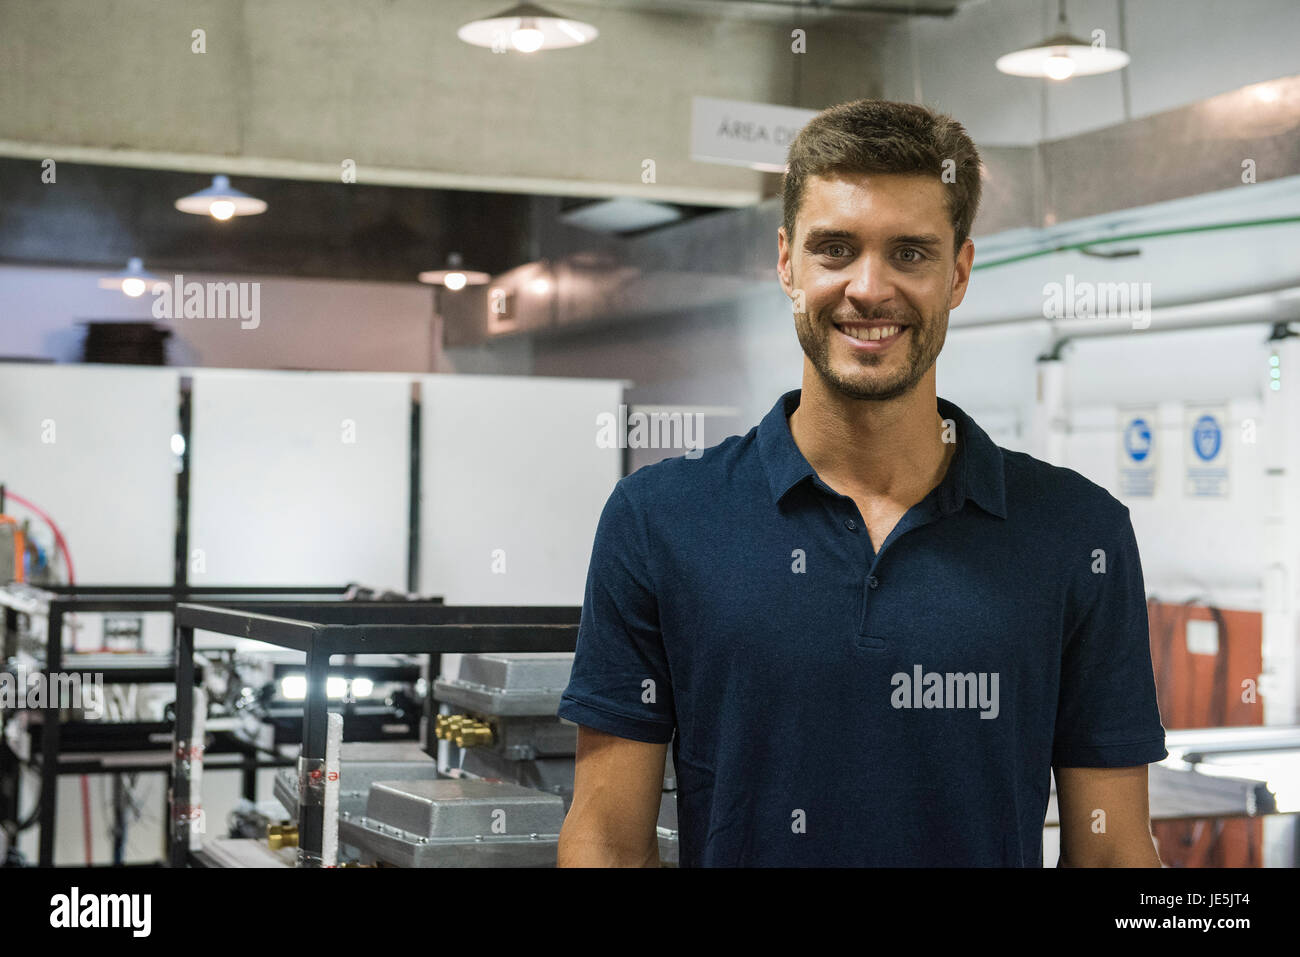 Man smiling in factory, portrait Stock Photo